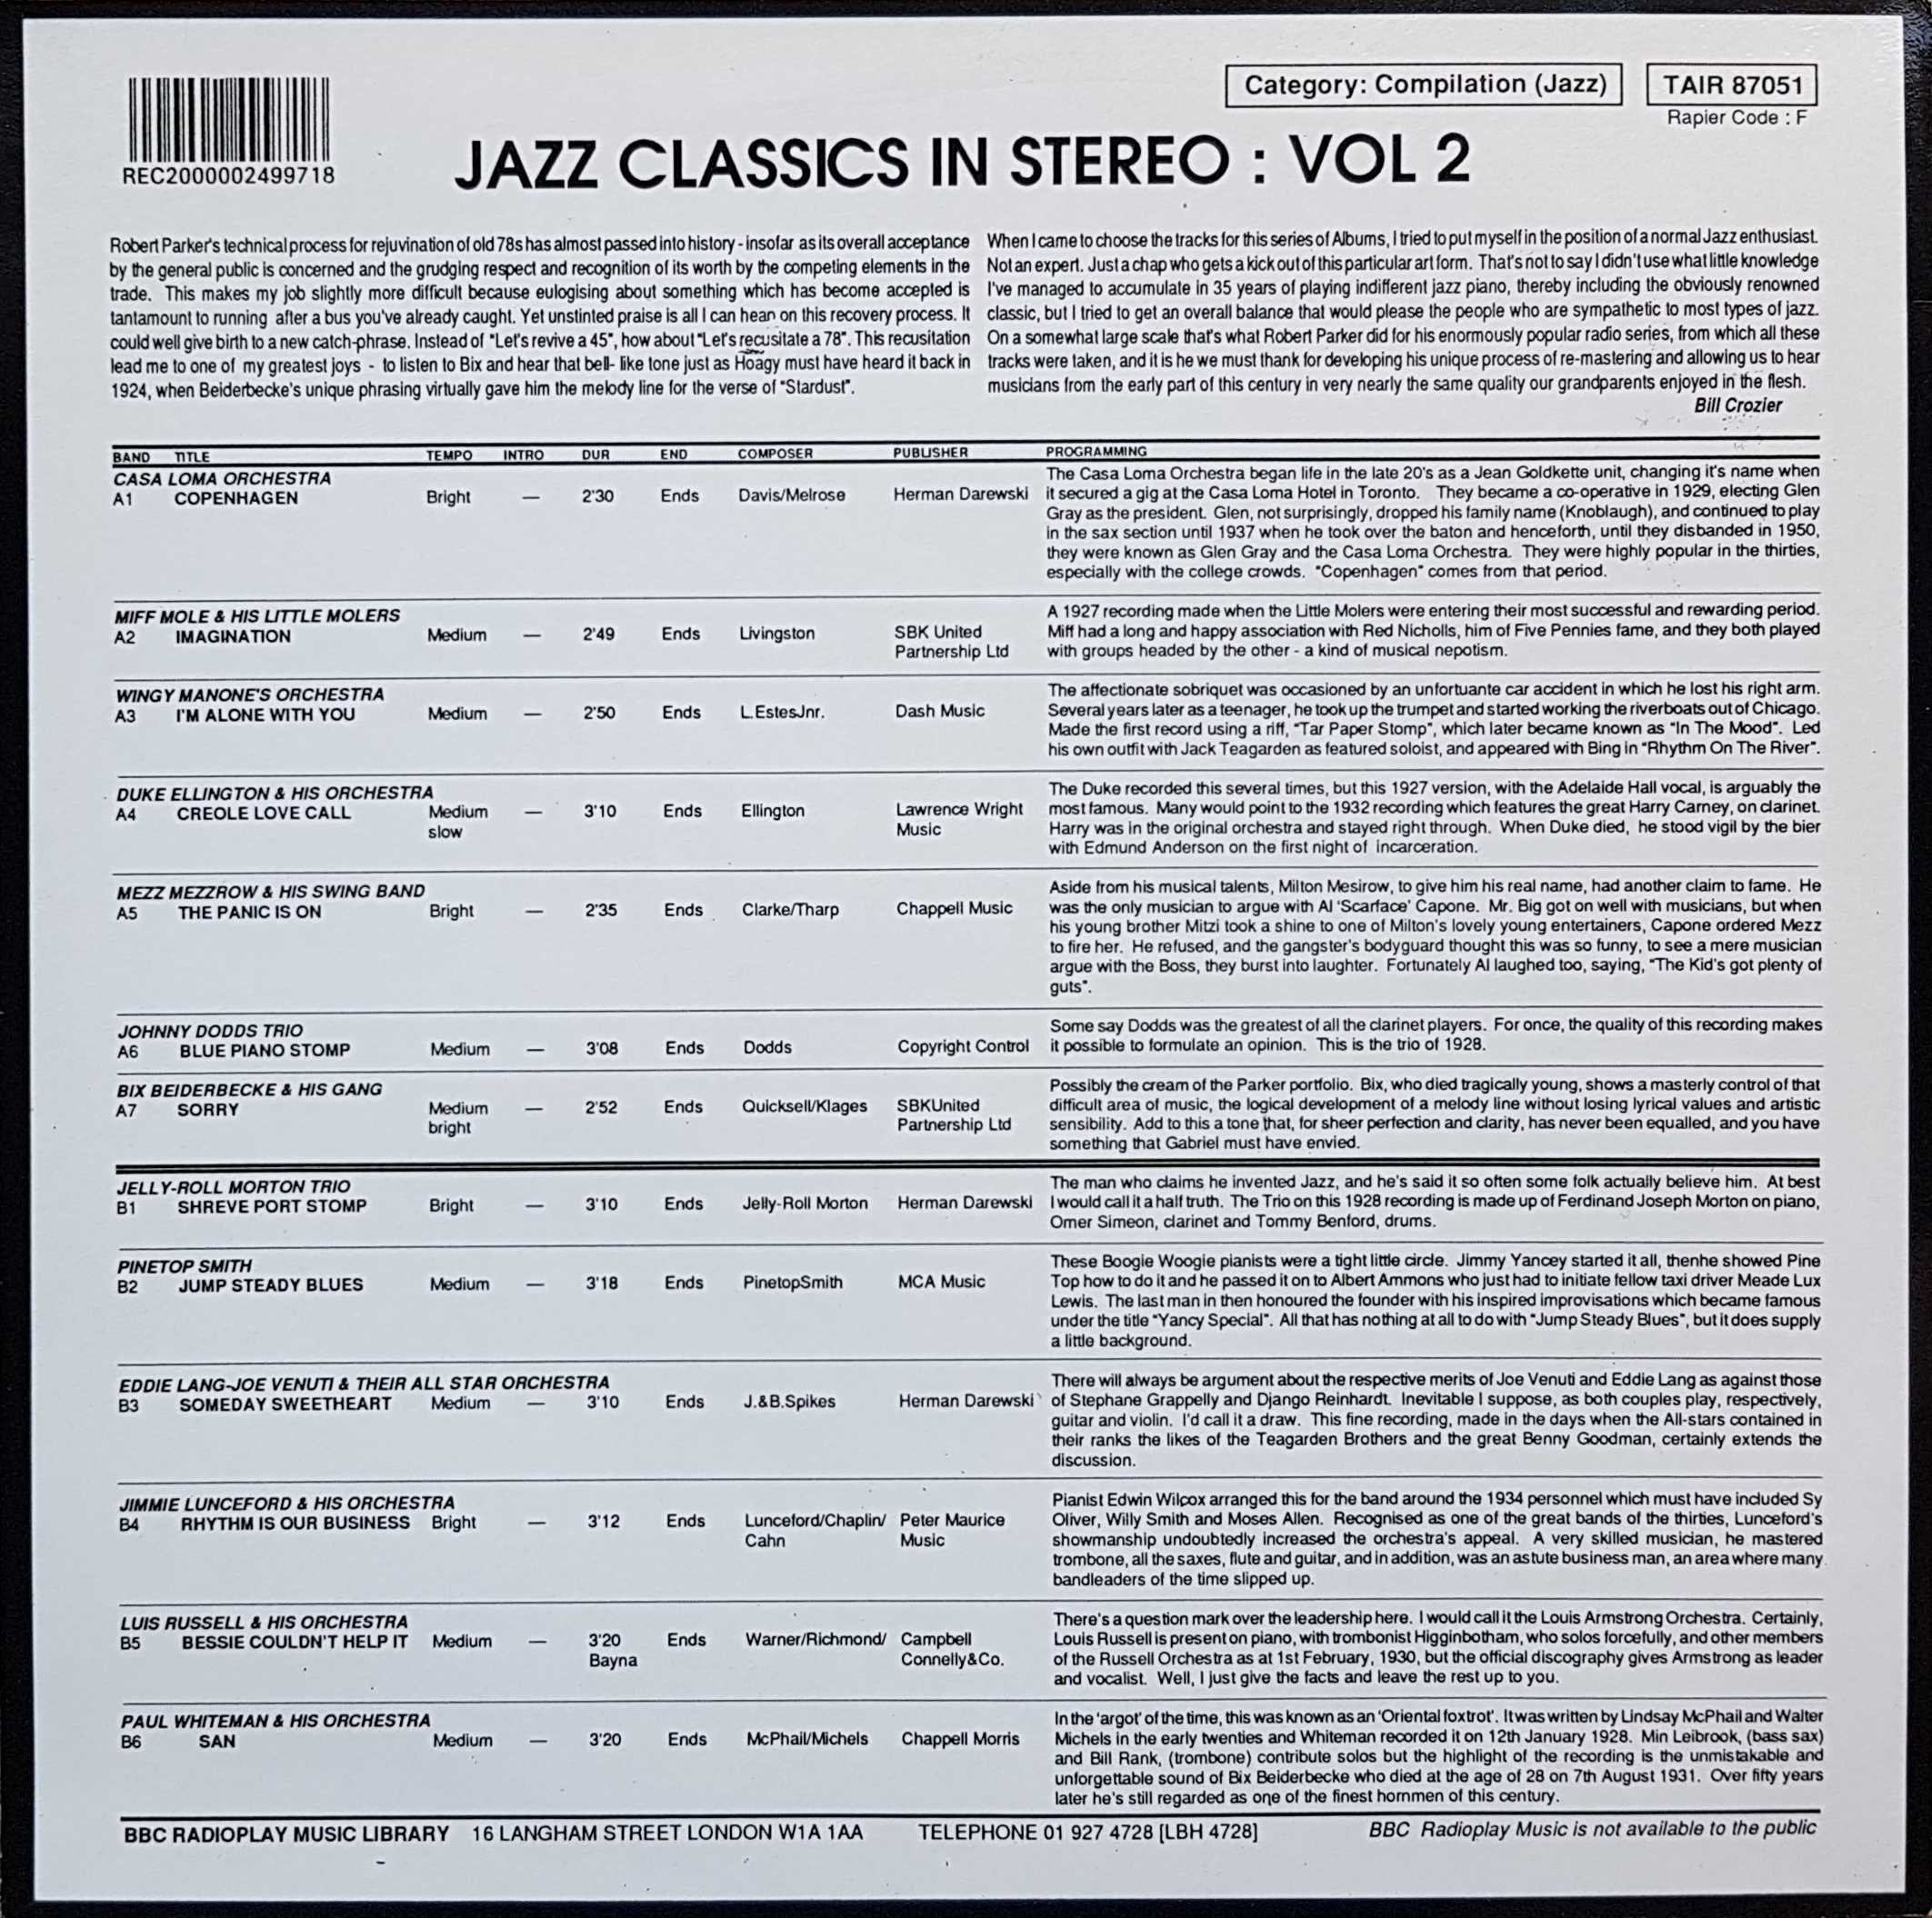 Picture of TAIR 87051 Jazz classics - Volume 2 by artist Various from the BBC records and Tapes library